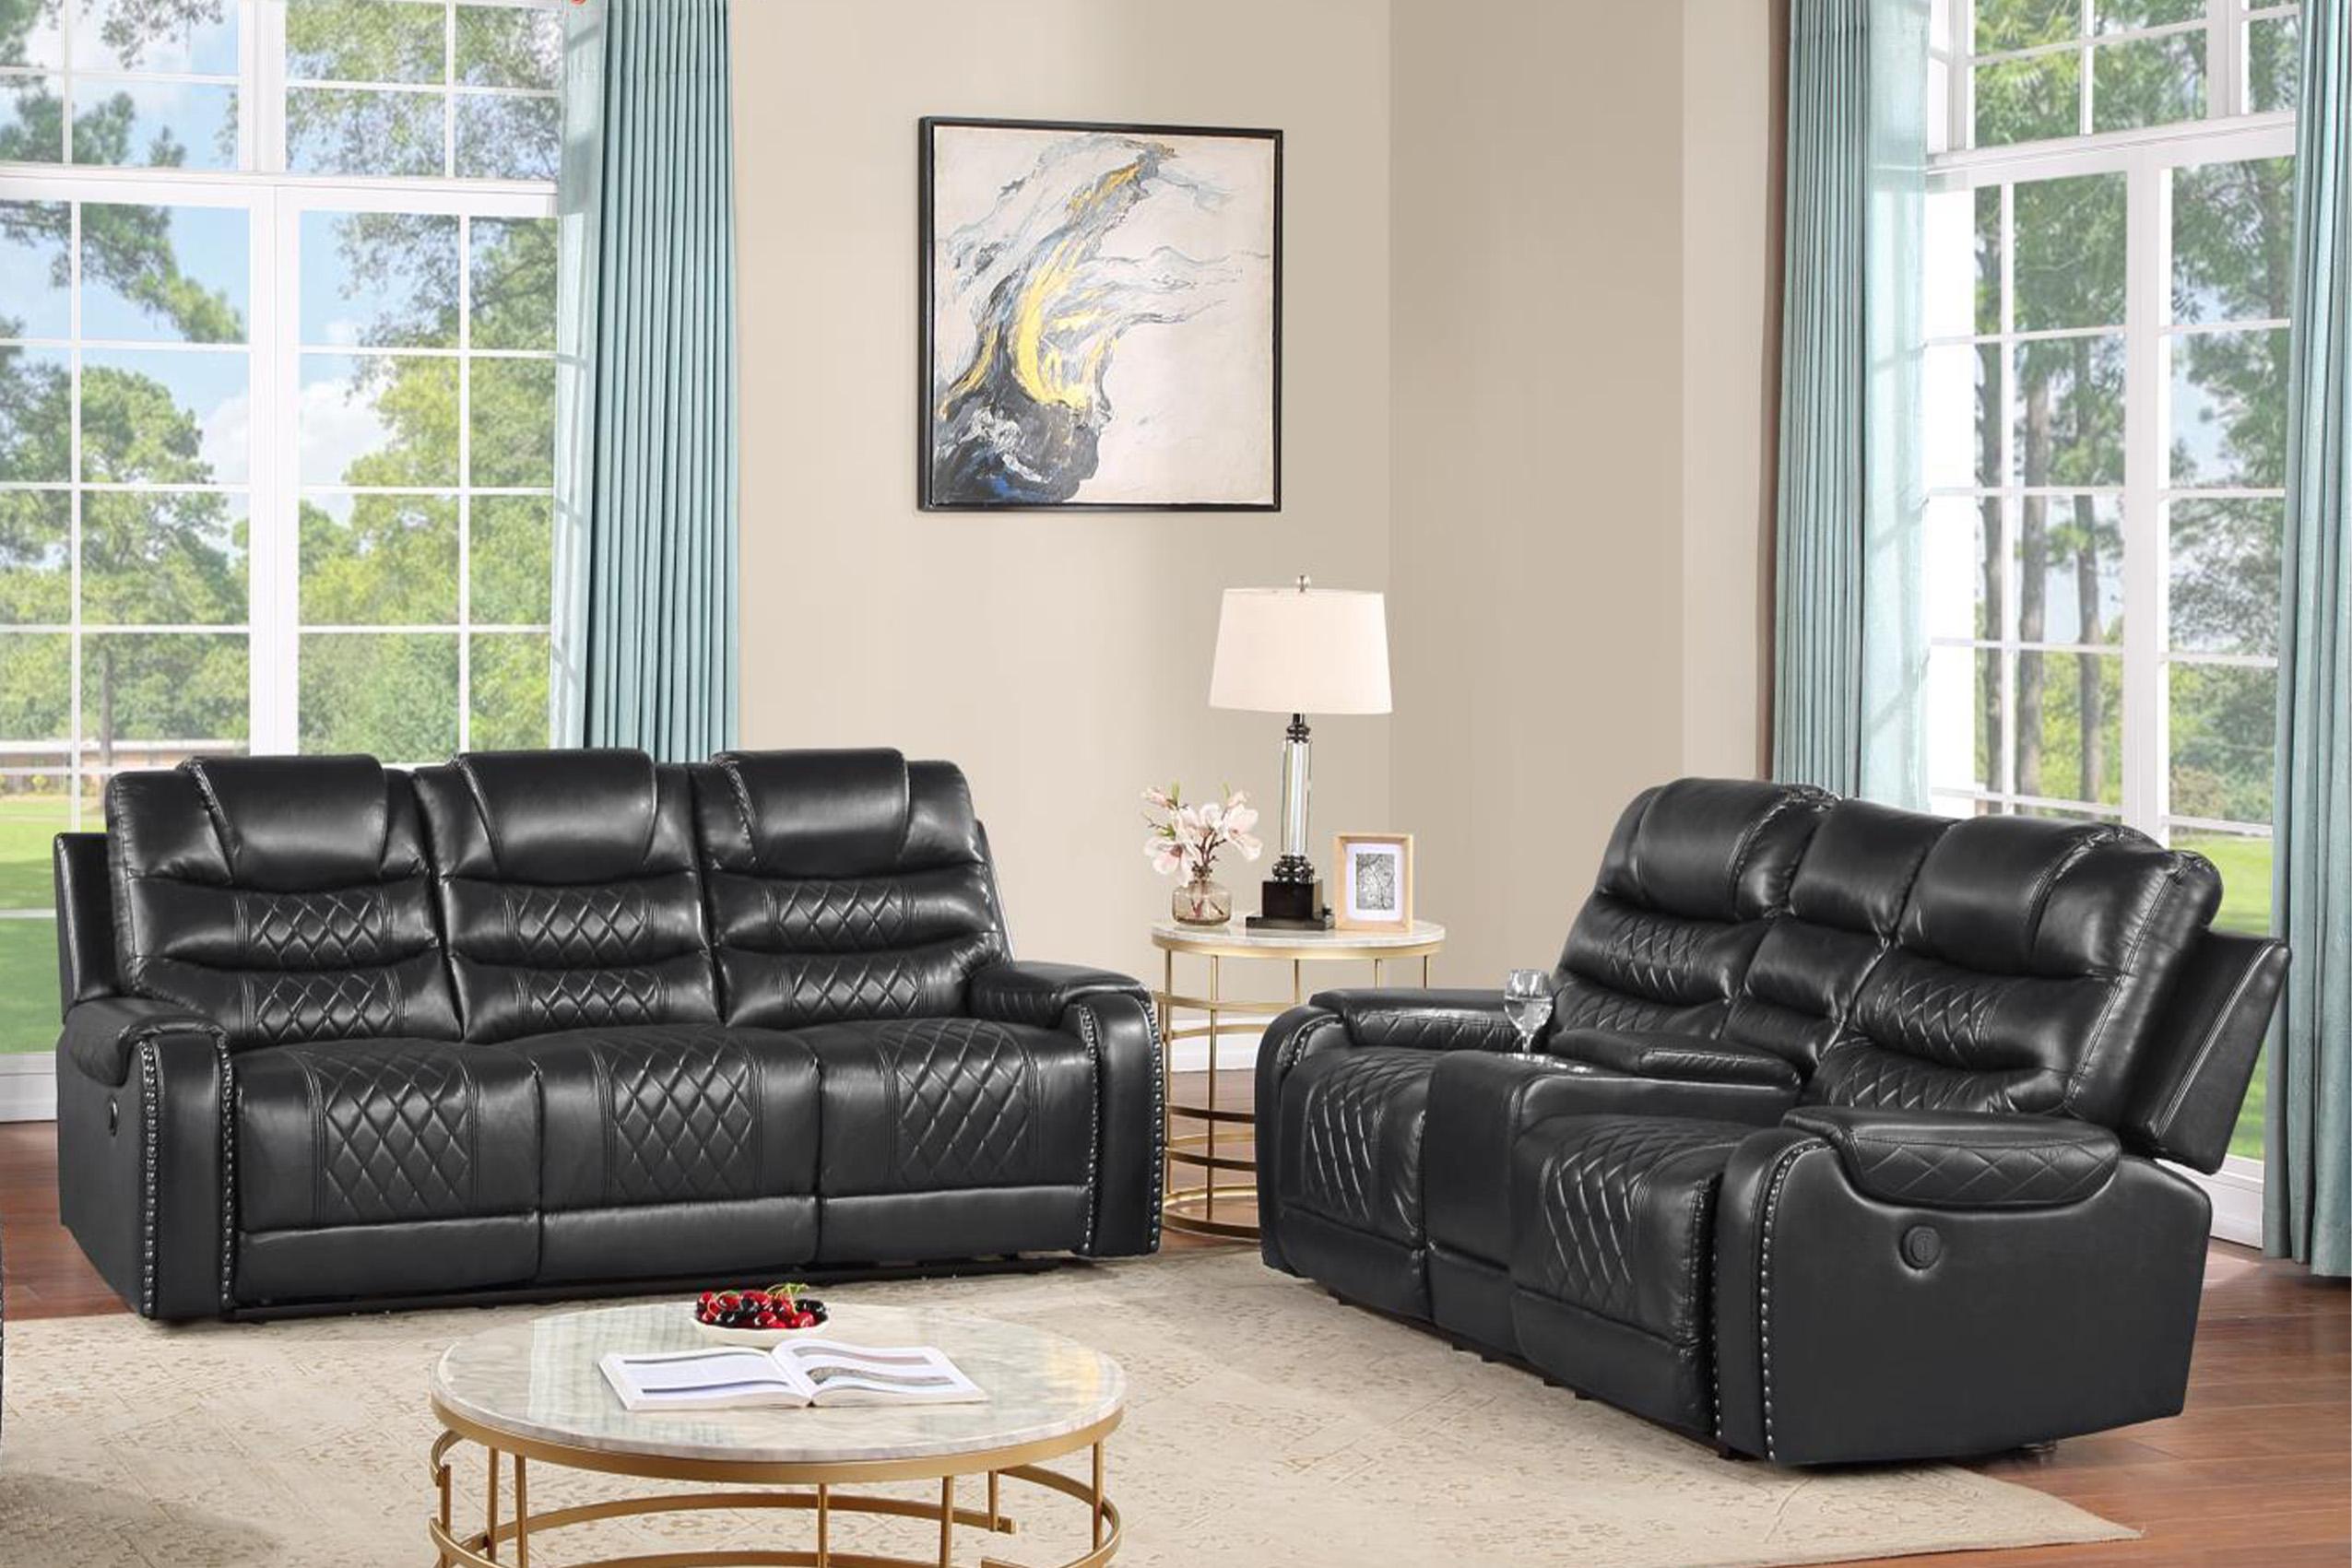 Contemporary, Modern Recliner Sofa Set TENNESSEE-GR TENNESSEE-GR-S-L in Gray Eco Leather